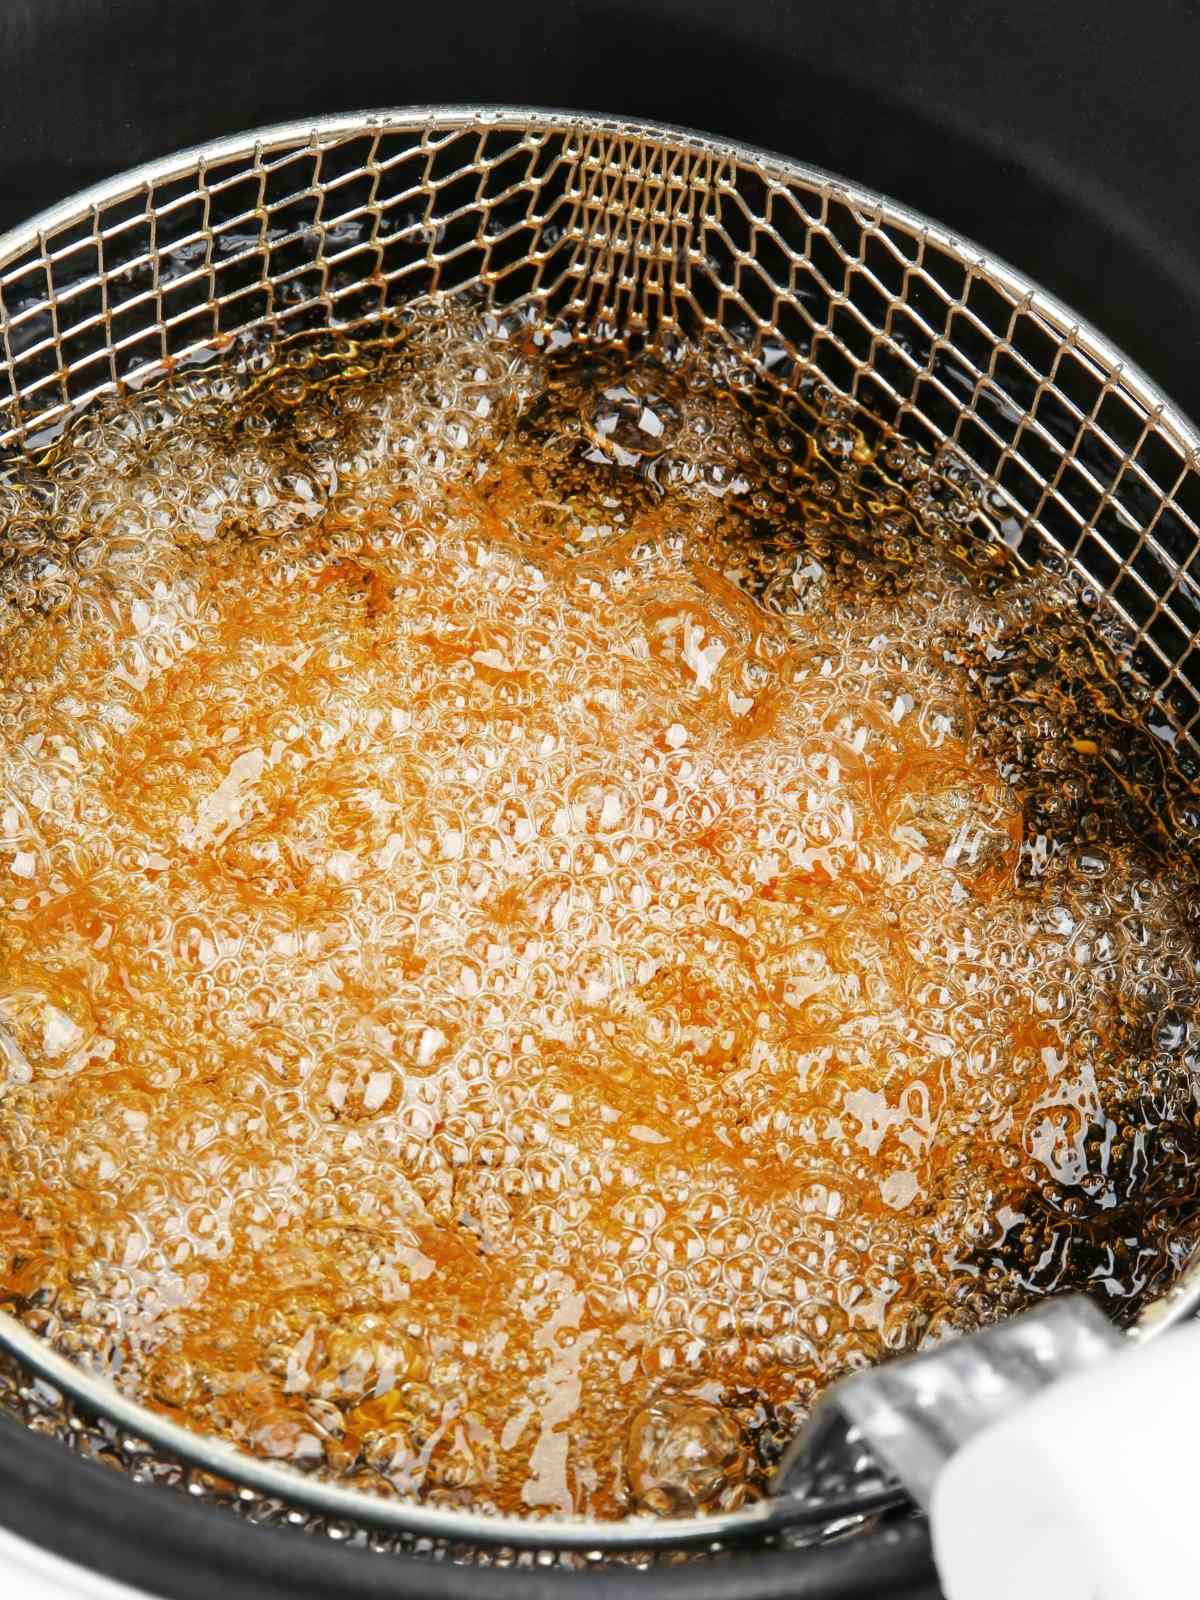 Deep fry bubbling with oil as it cooks french fries.